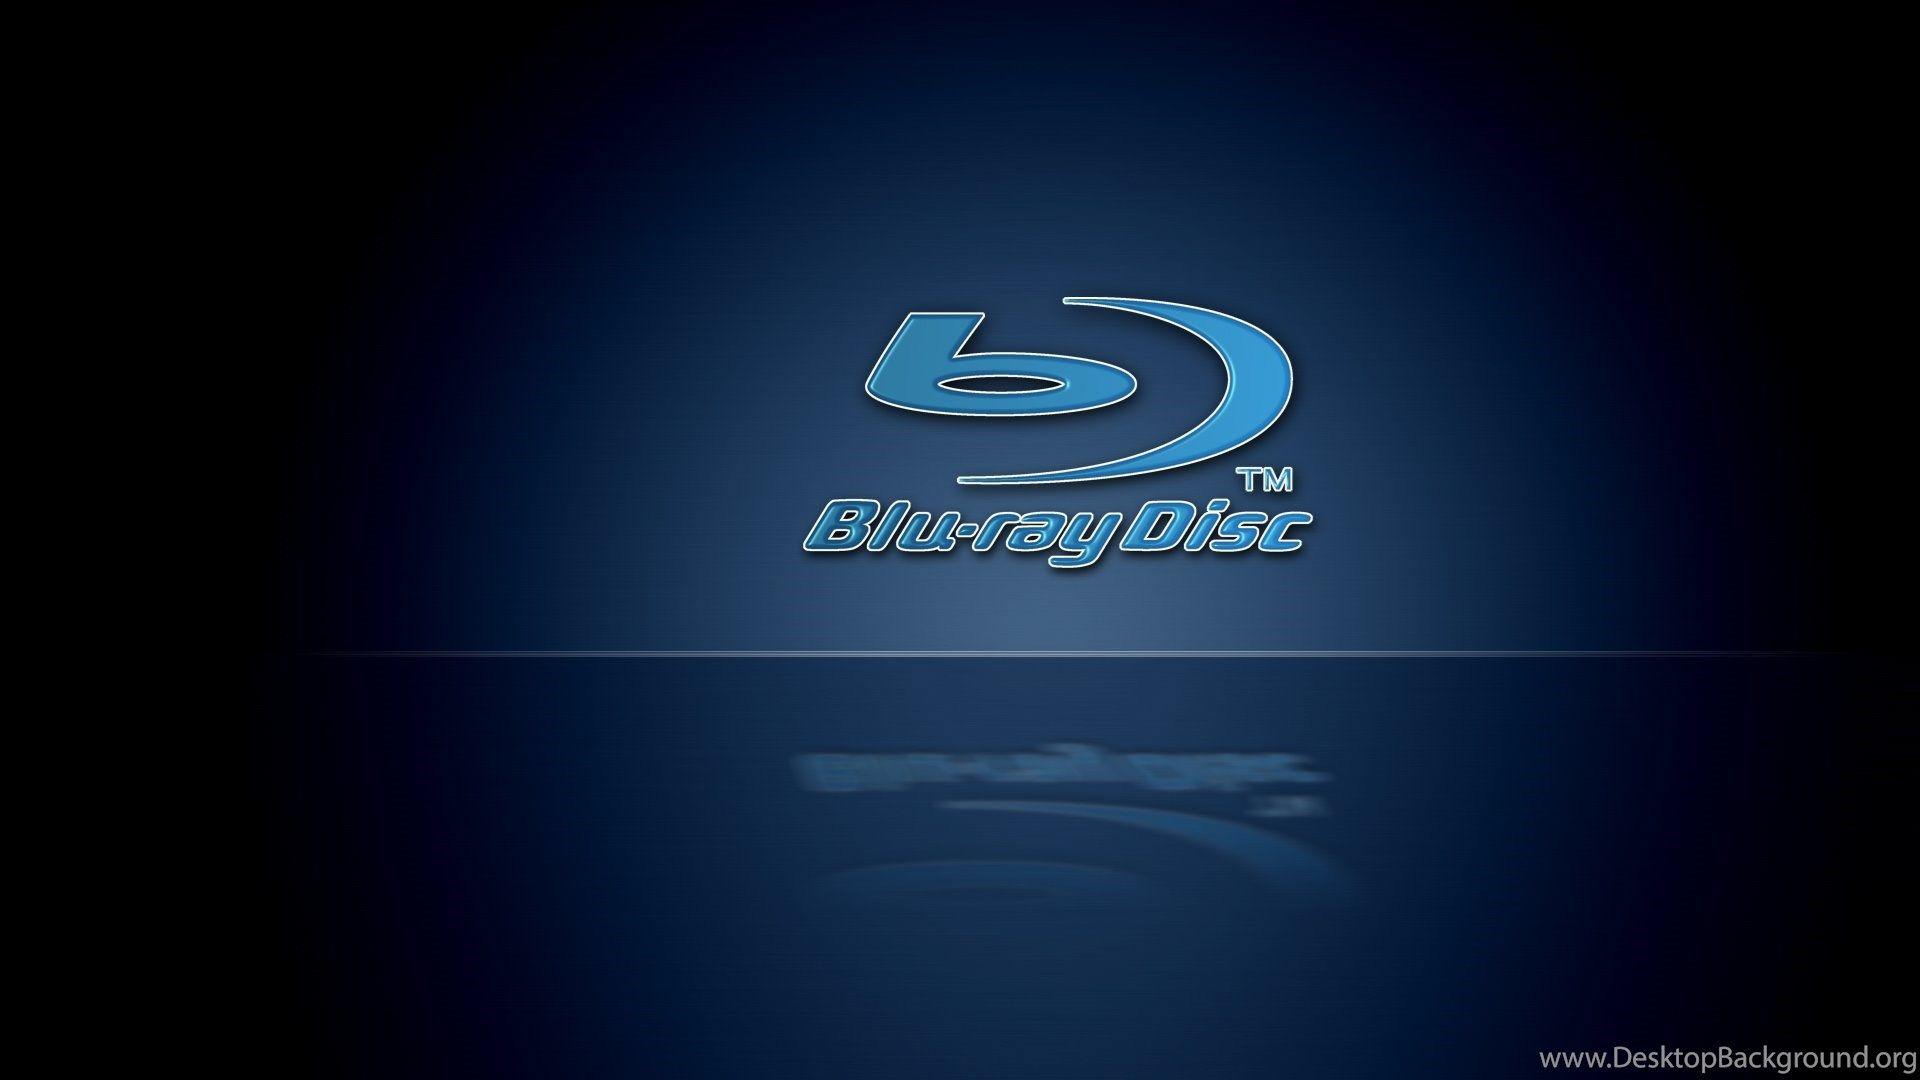 Blu Ray, High, Resolution, 1920x1080 HD Wallpaper And FREE Stock